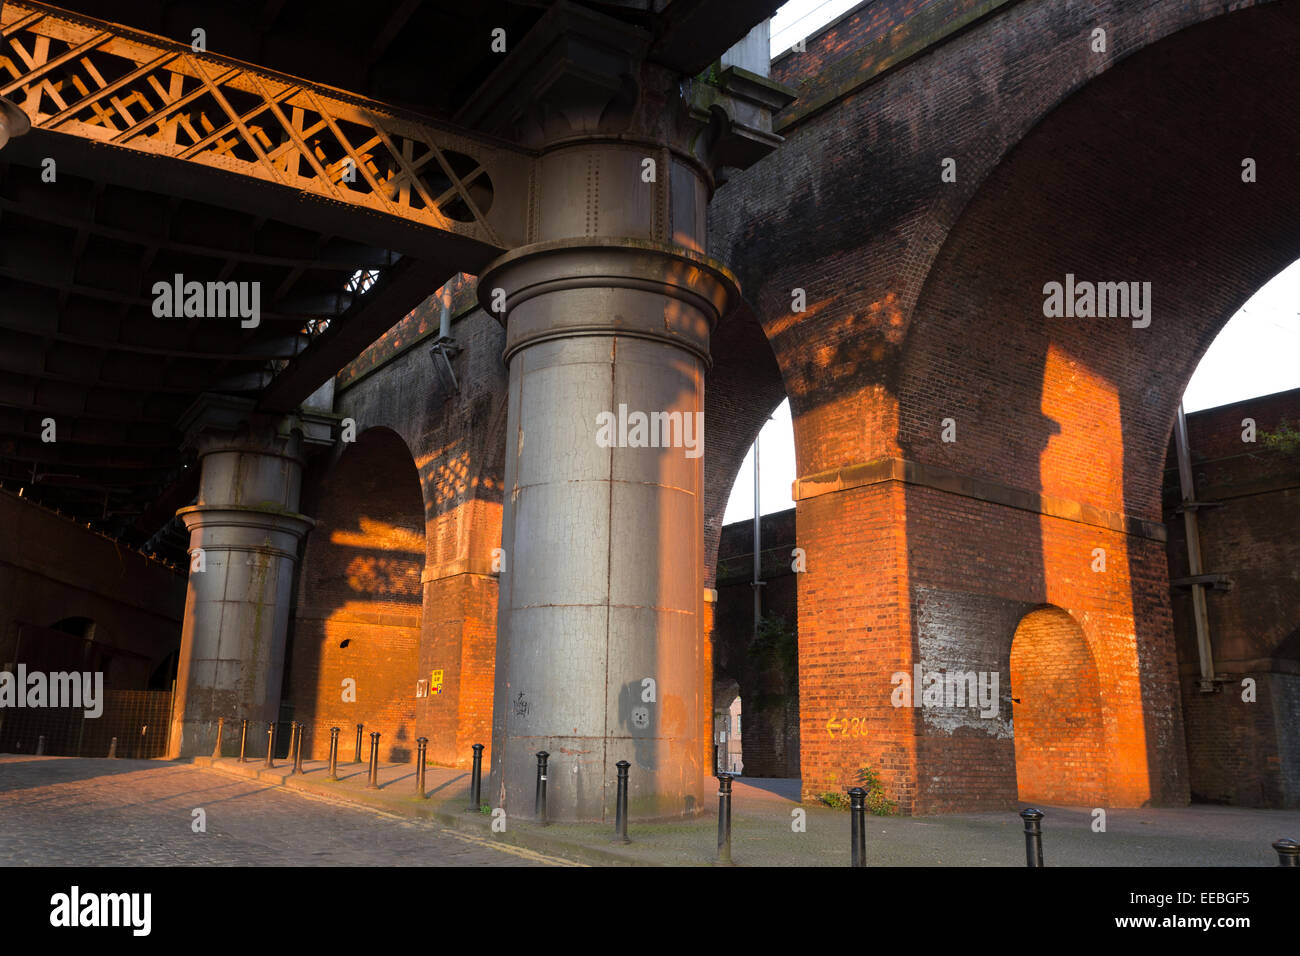 England, Manchester, Castlefield, arches of Victorian railway Stock Photo